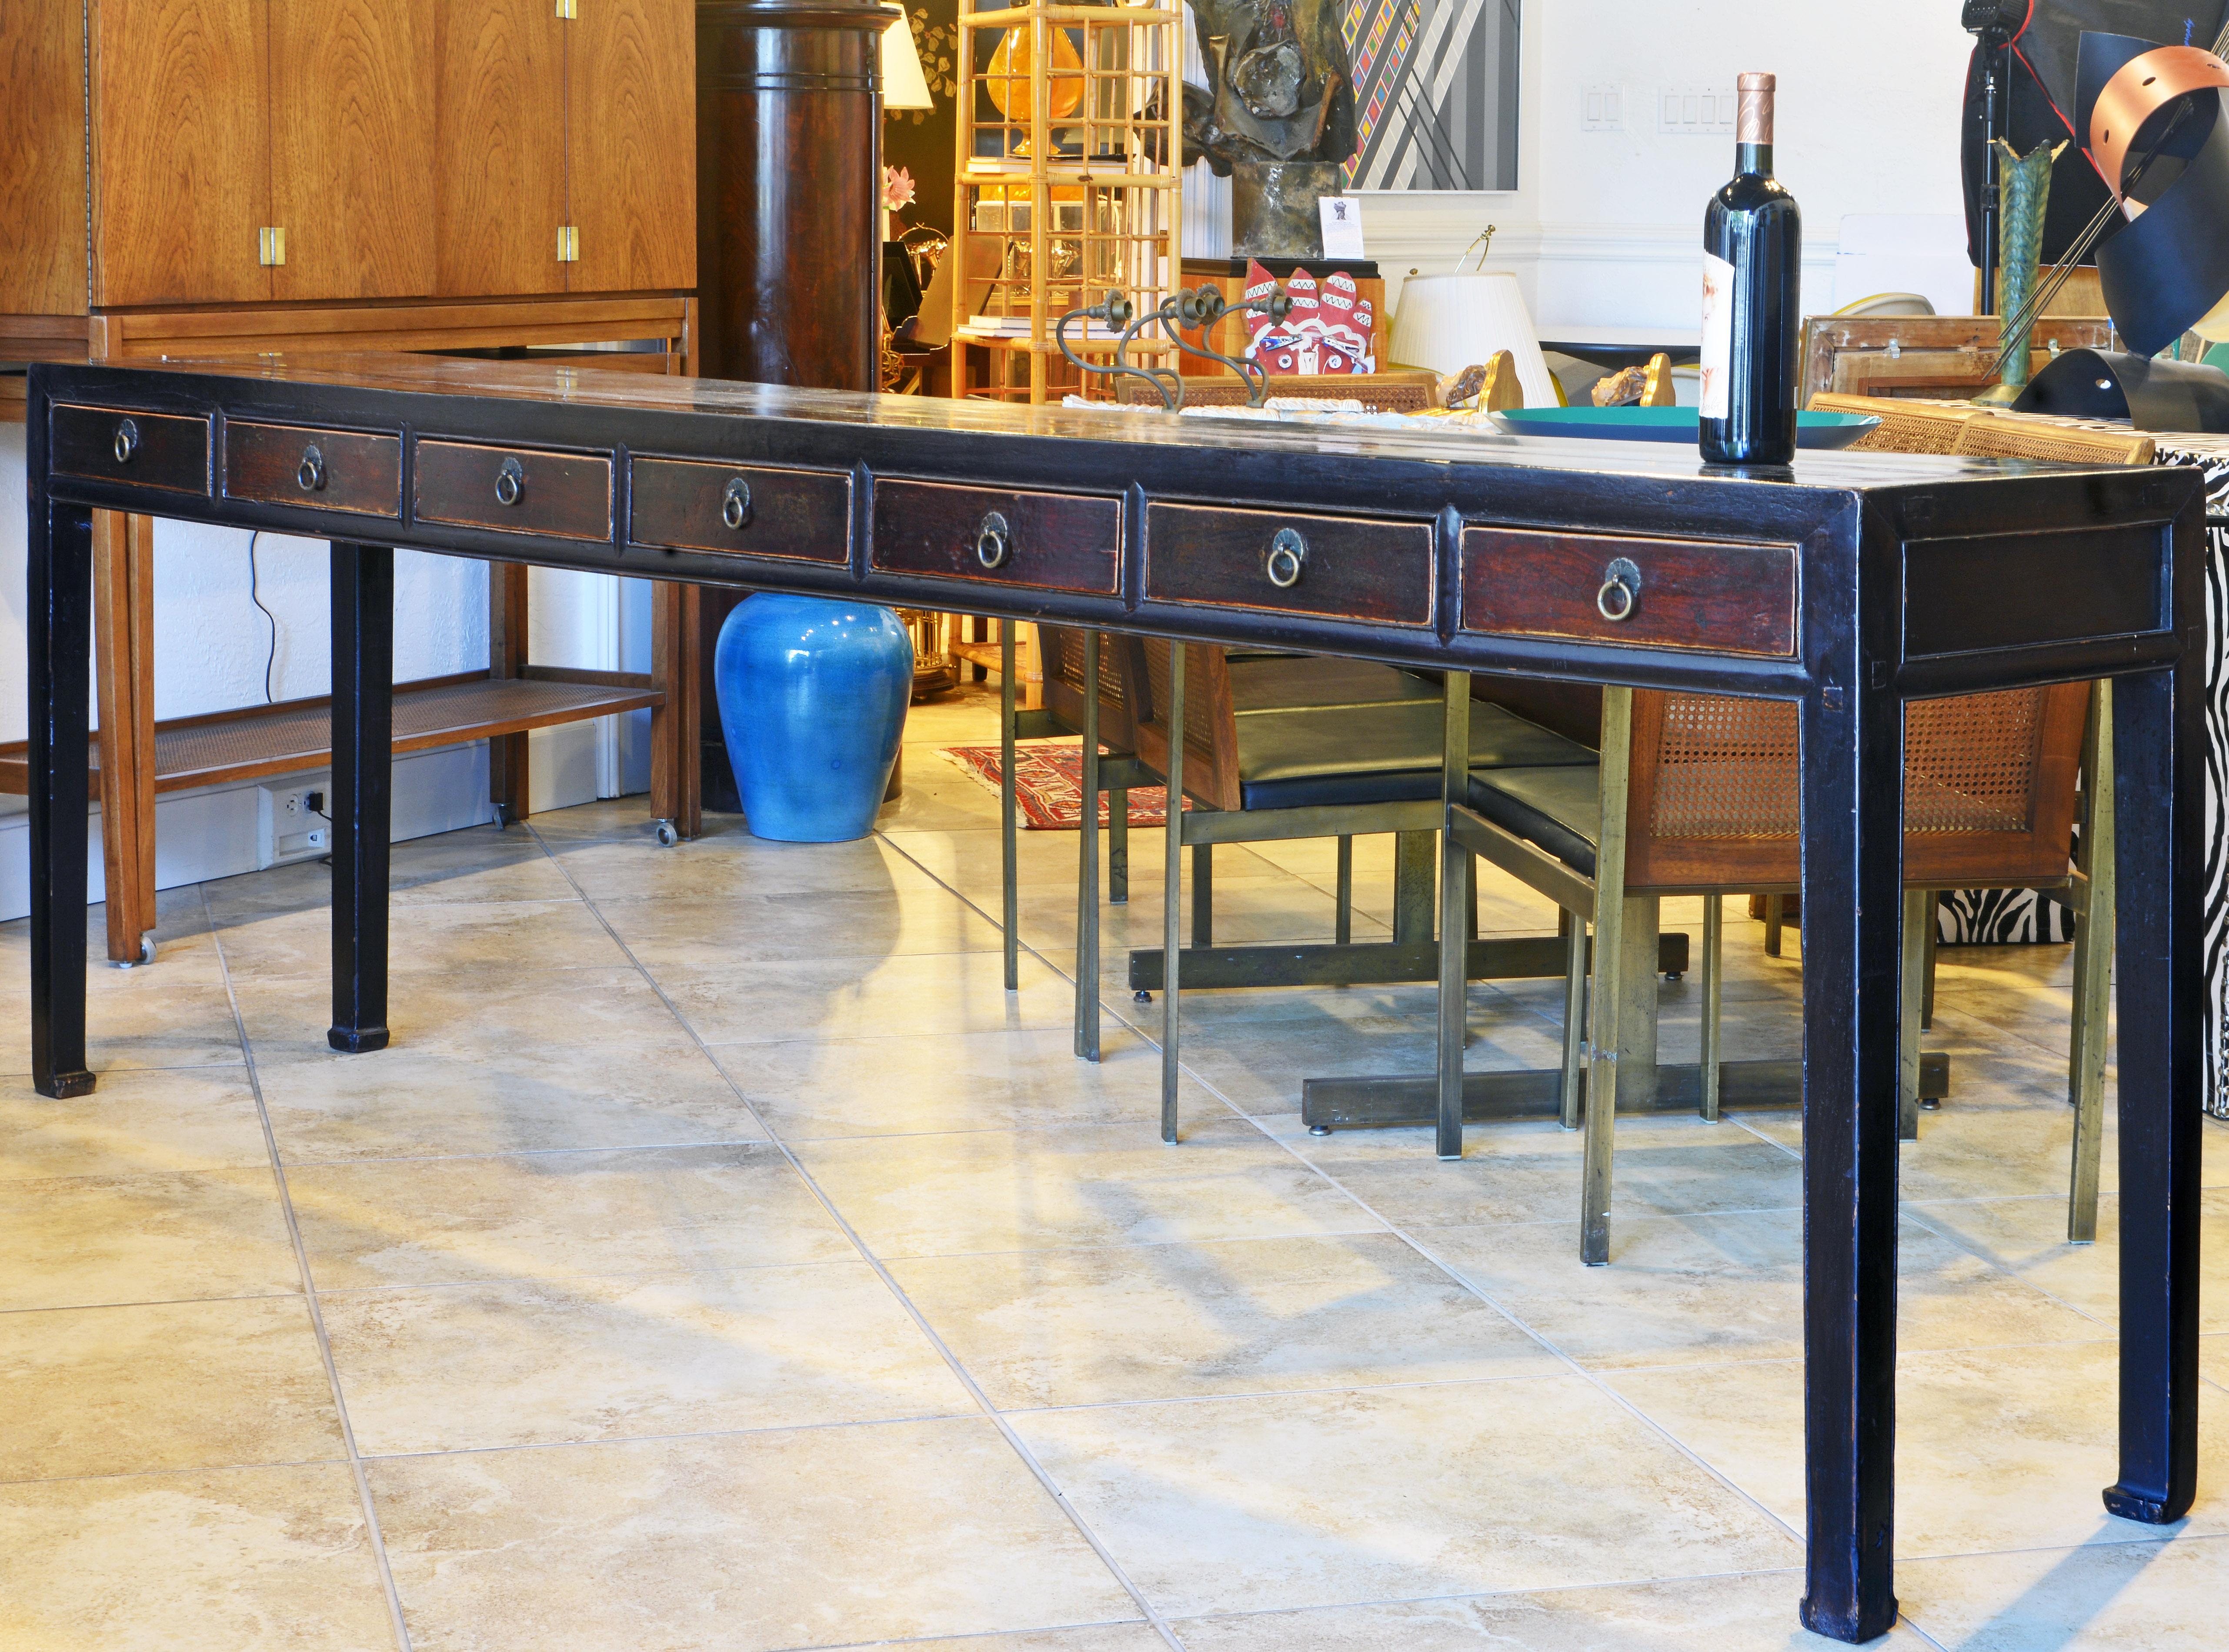 This extra long Chinese console table or altar table dates to the late 19th century and has been gracefully restored. It features a lacquered top above 7 short wood color drawers resting on square Ming style legs. The table looks good from both